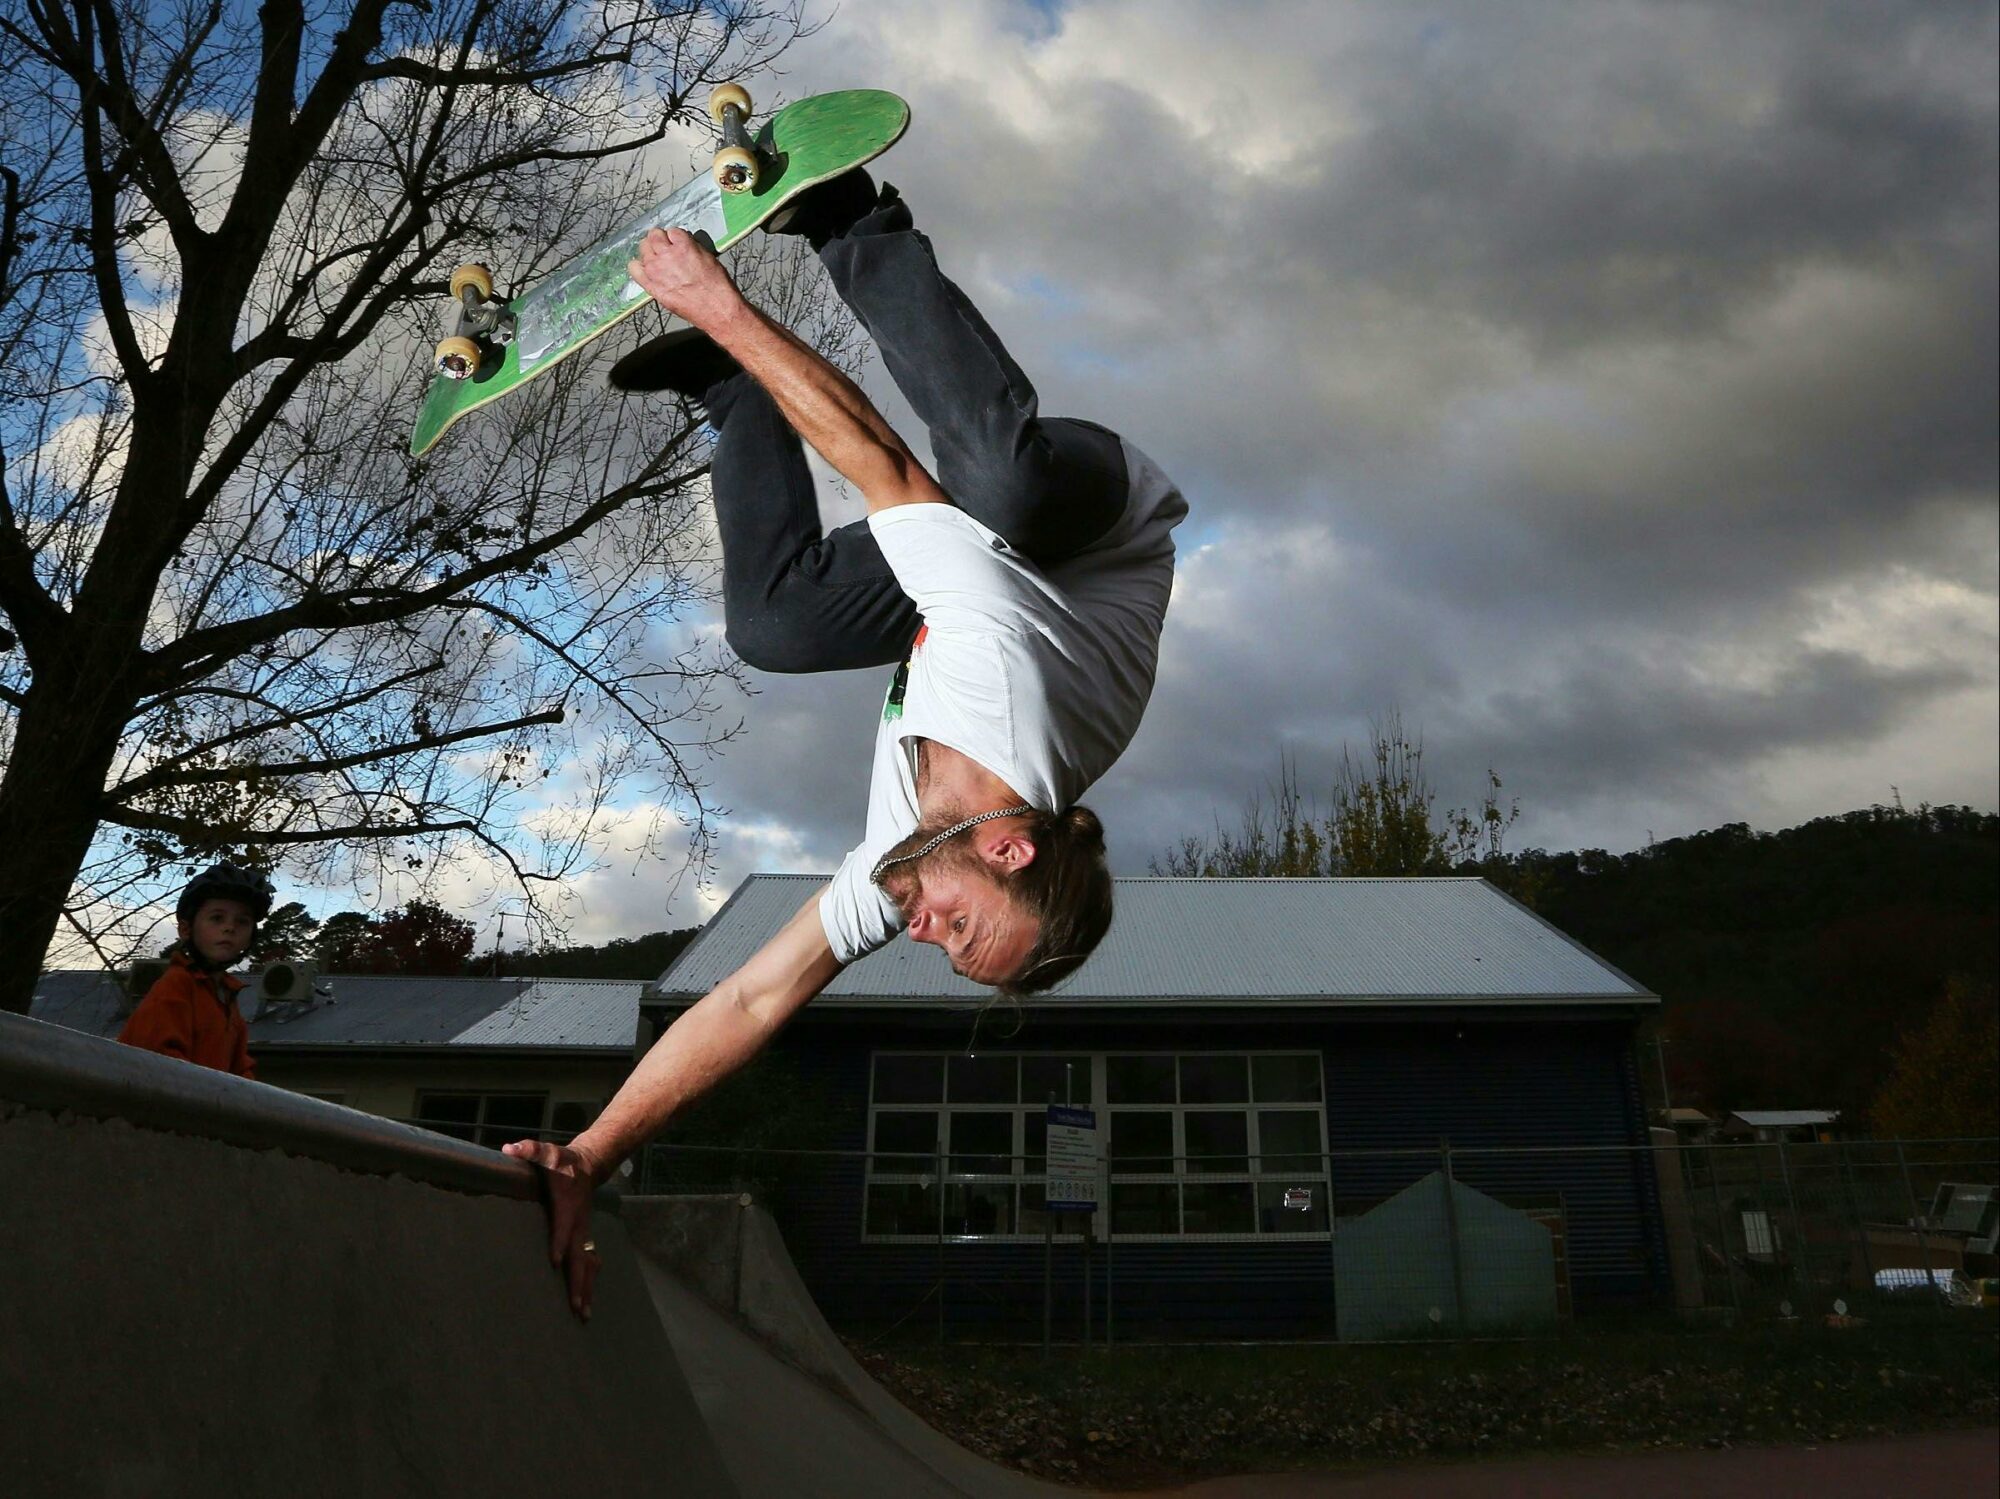 North East Skate Park Series - Round Seven, Bright